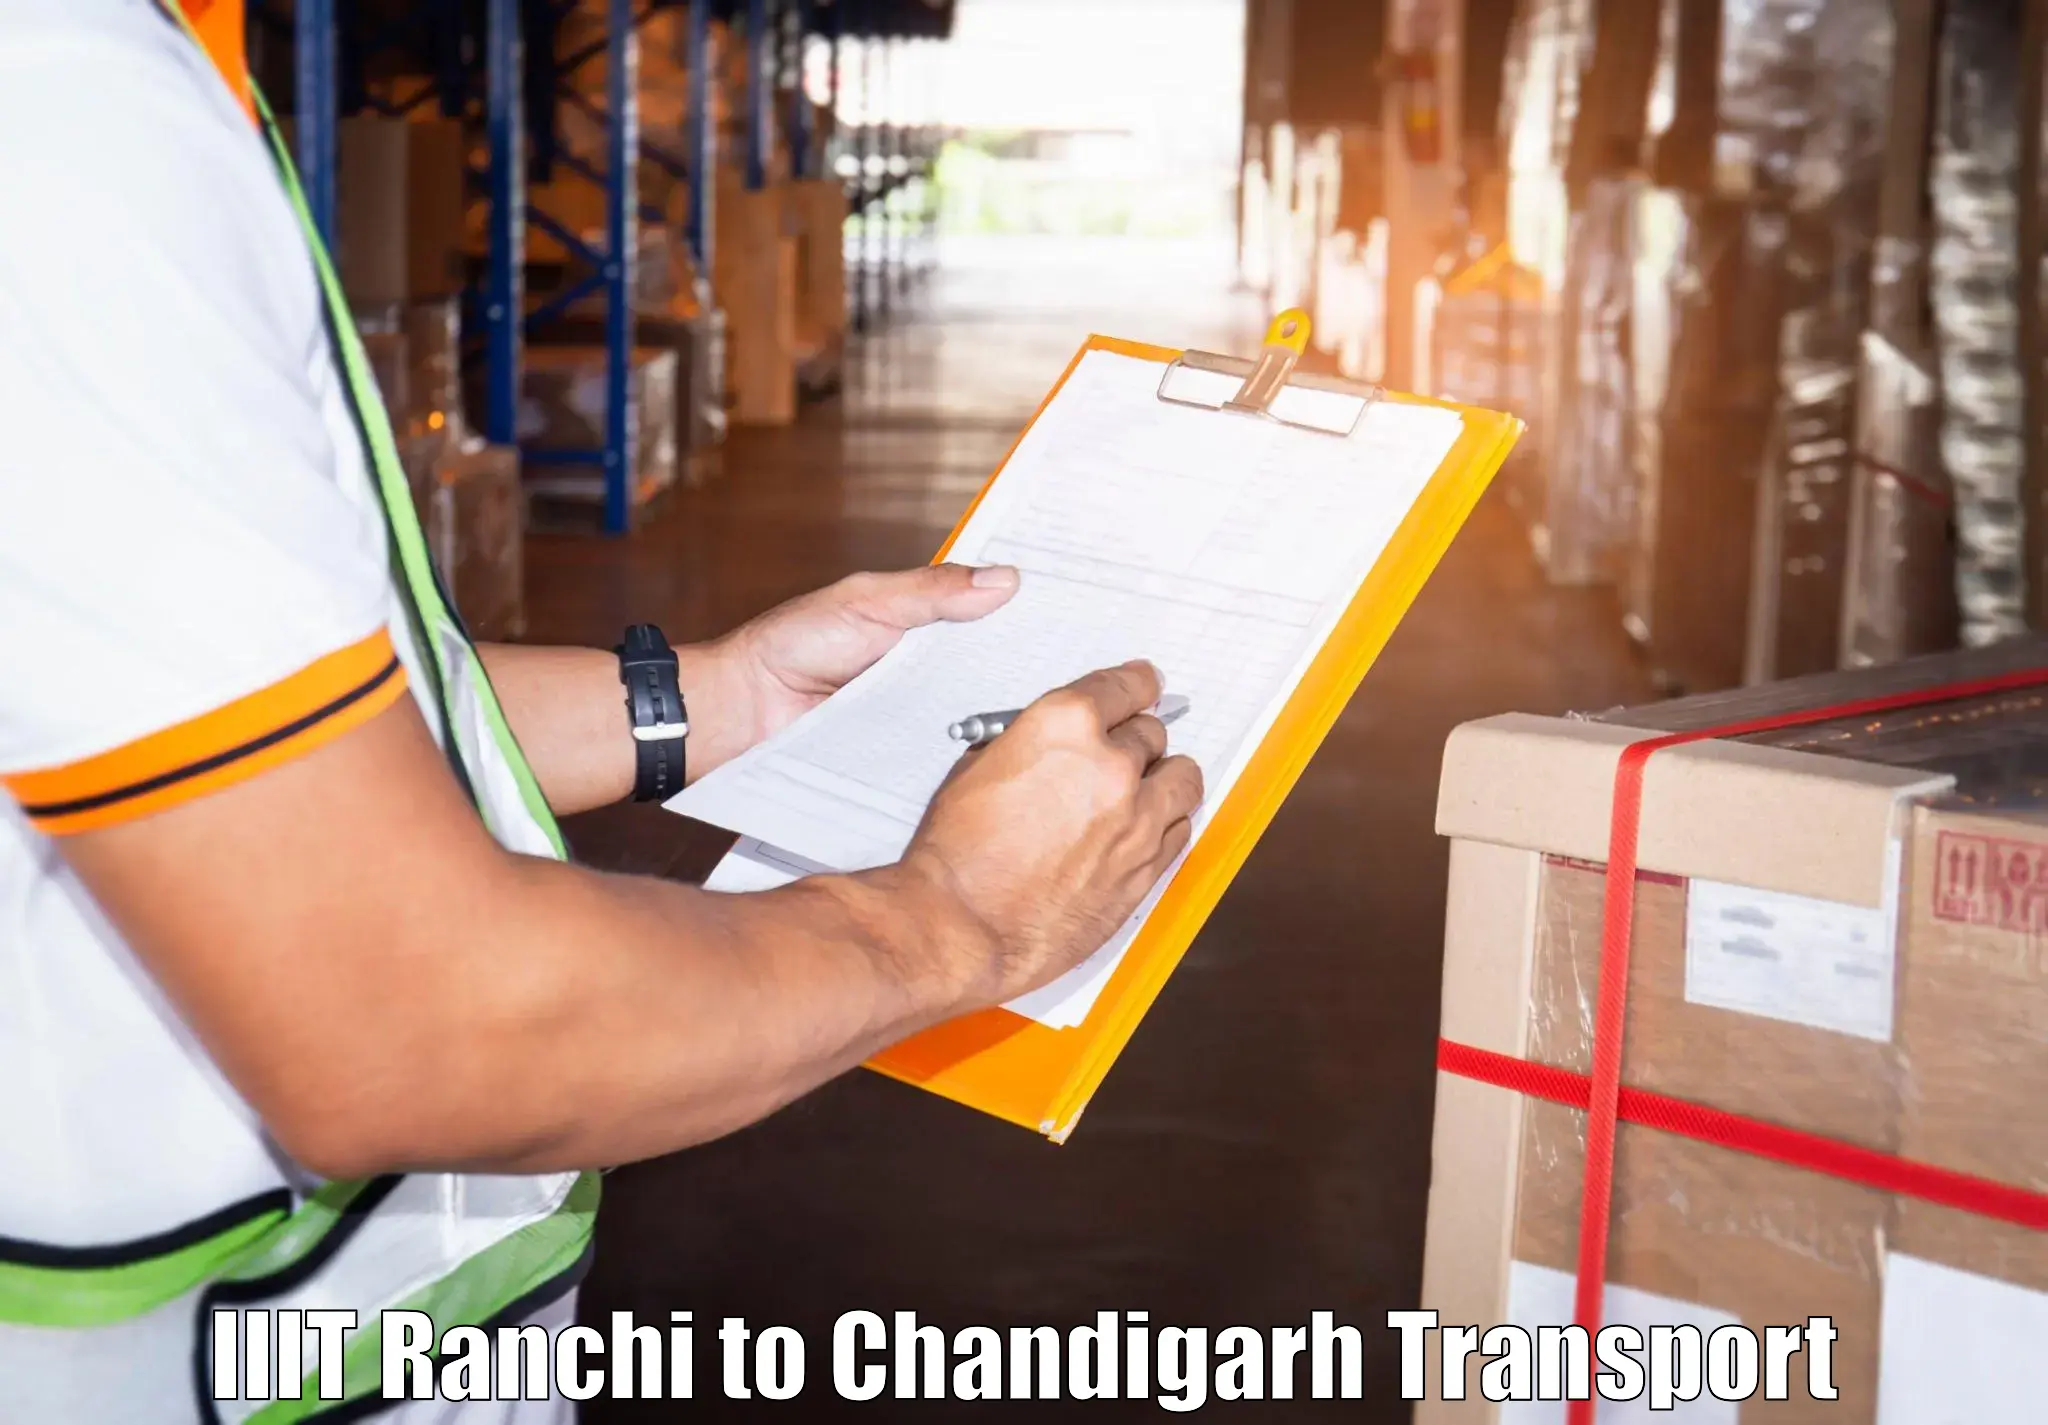 Land transport services IIIT Ranchi to Chandigarh